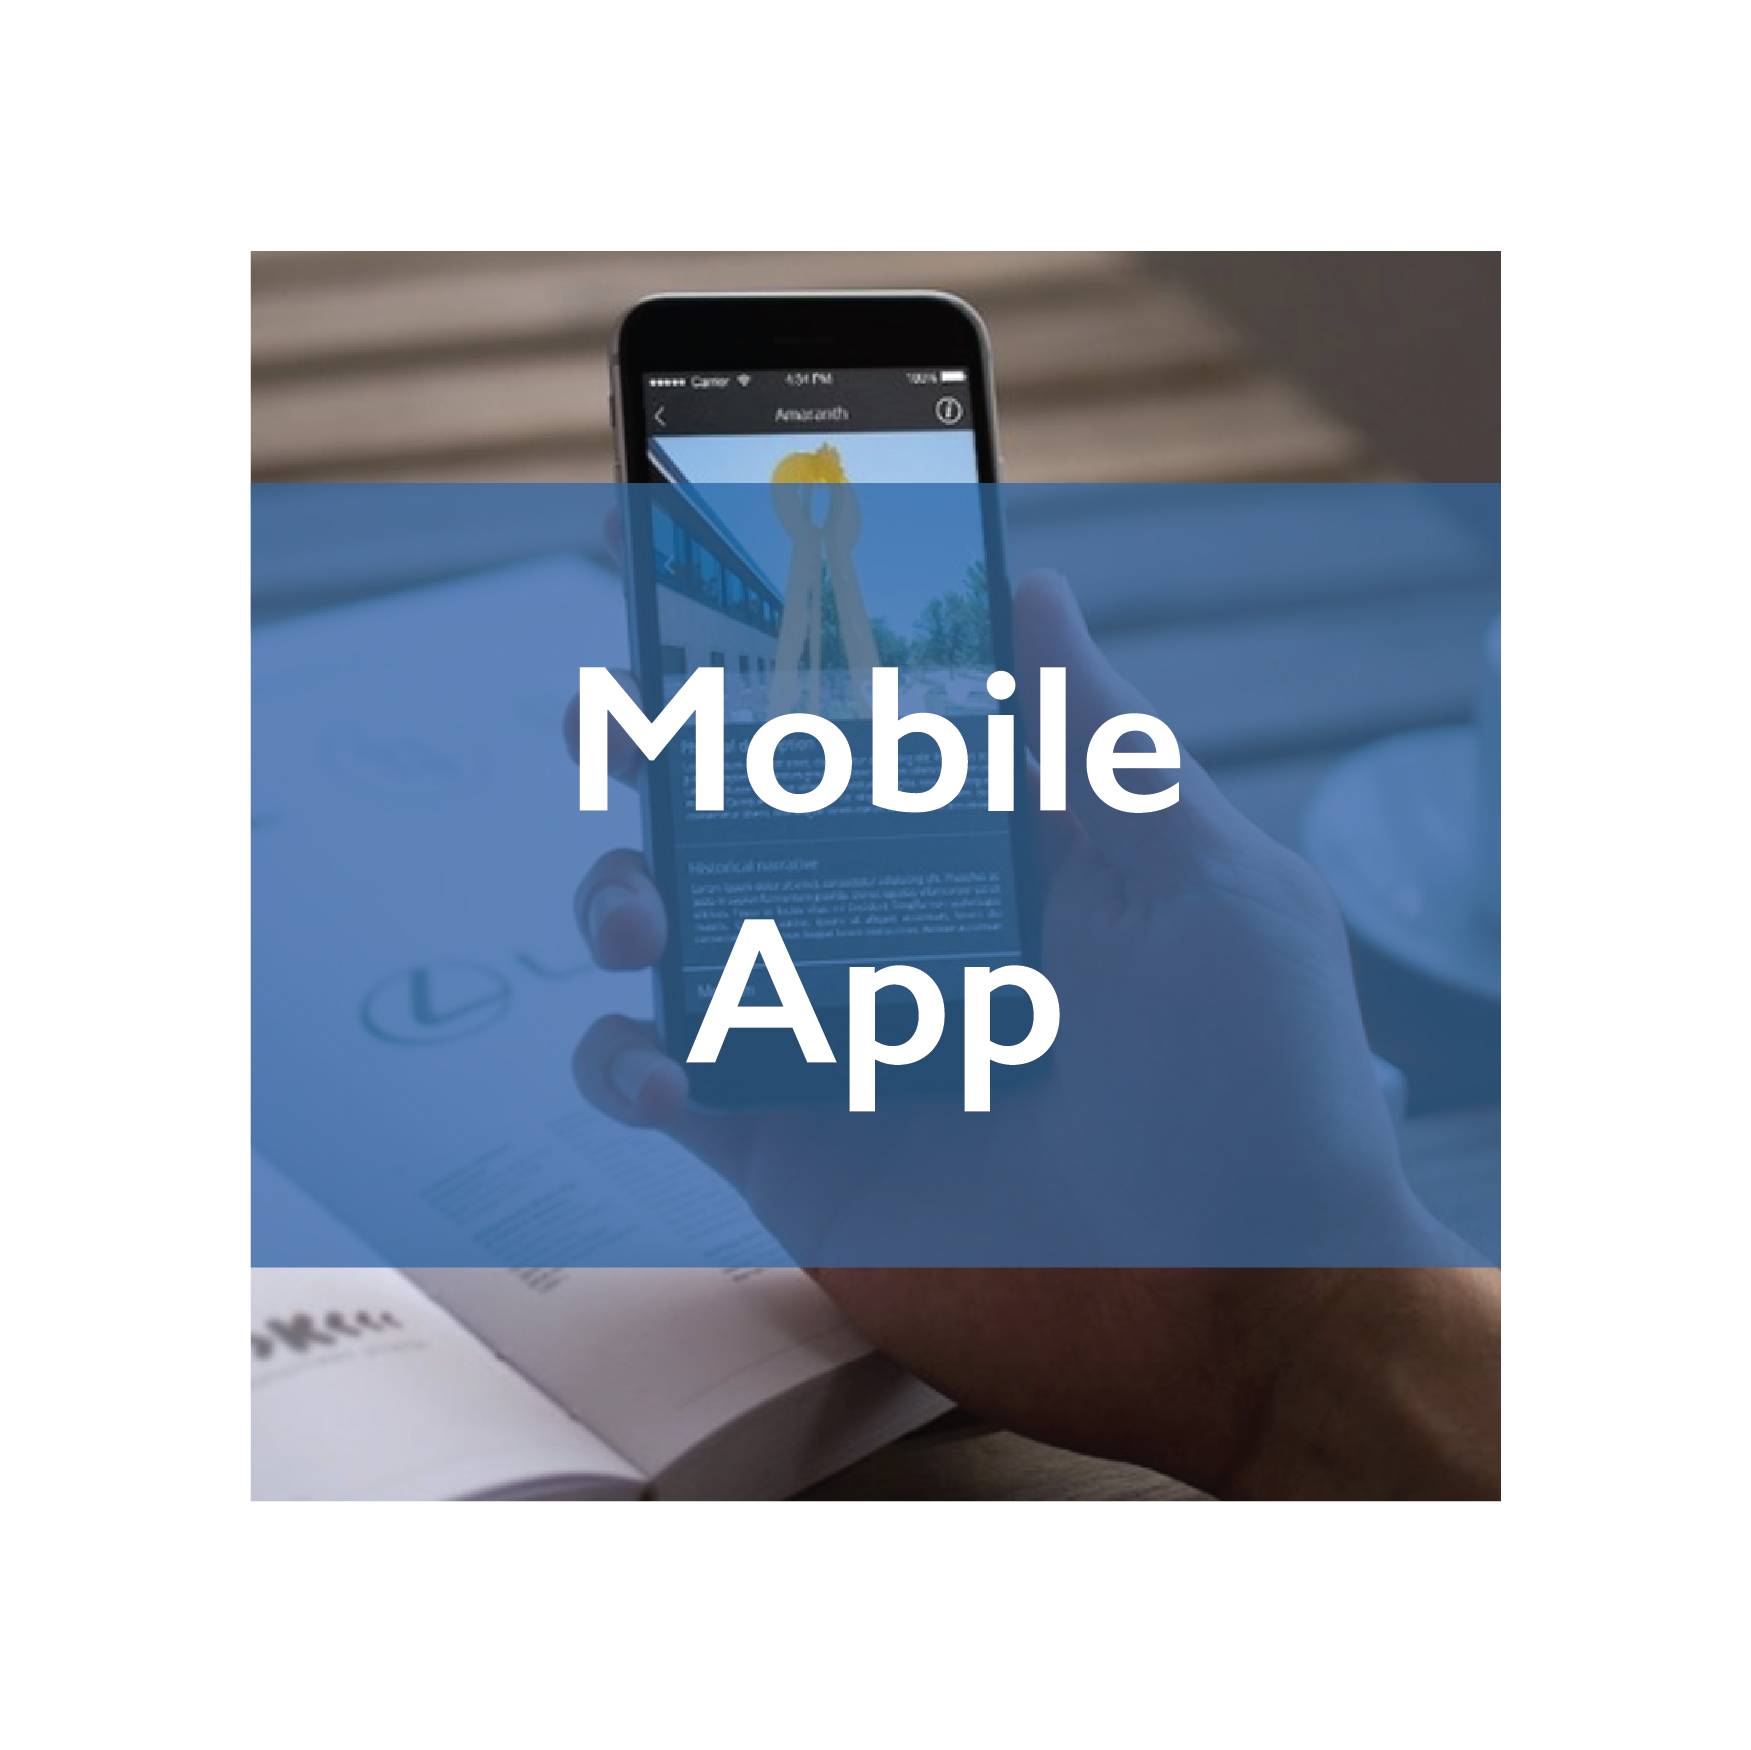 Closeup of smartphone screen with blue bar across image and text that reads "Mobile App"